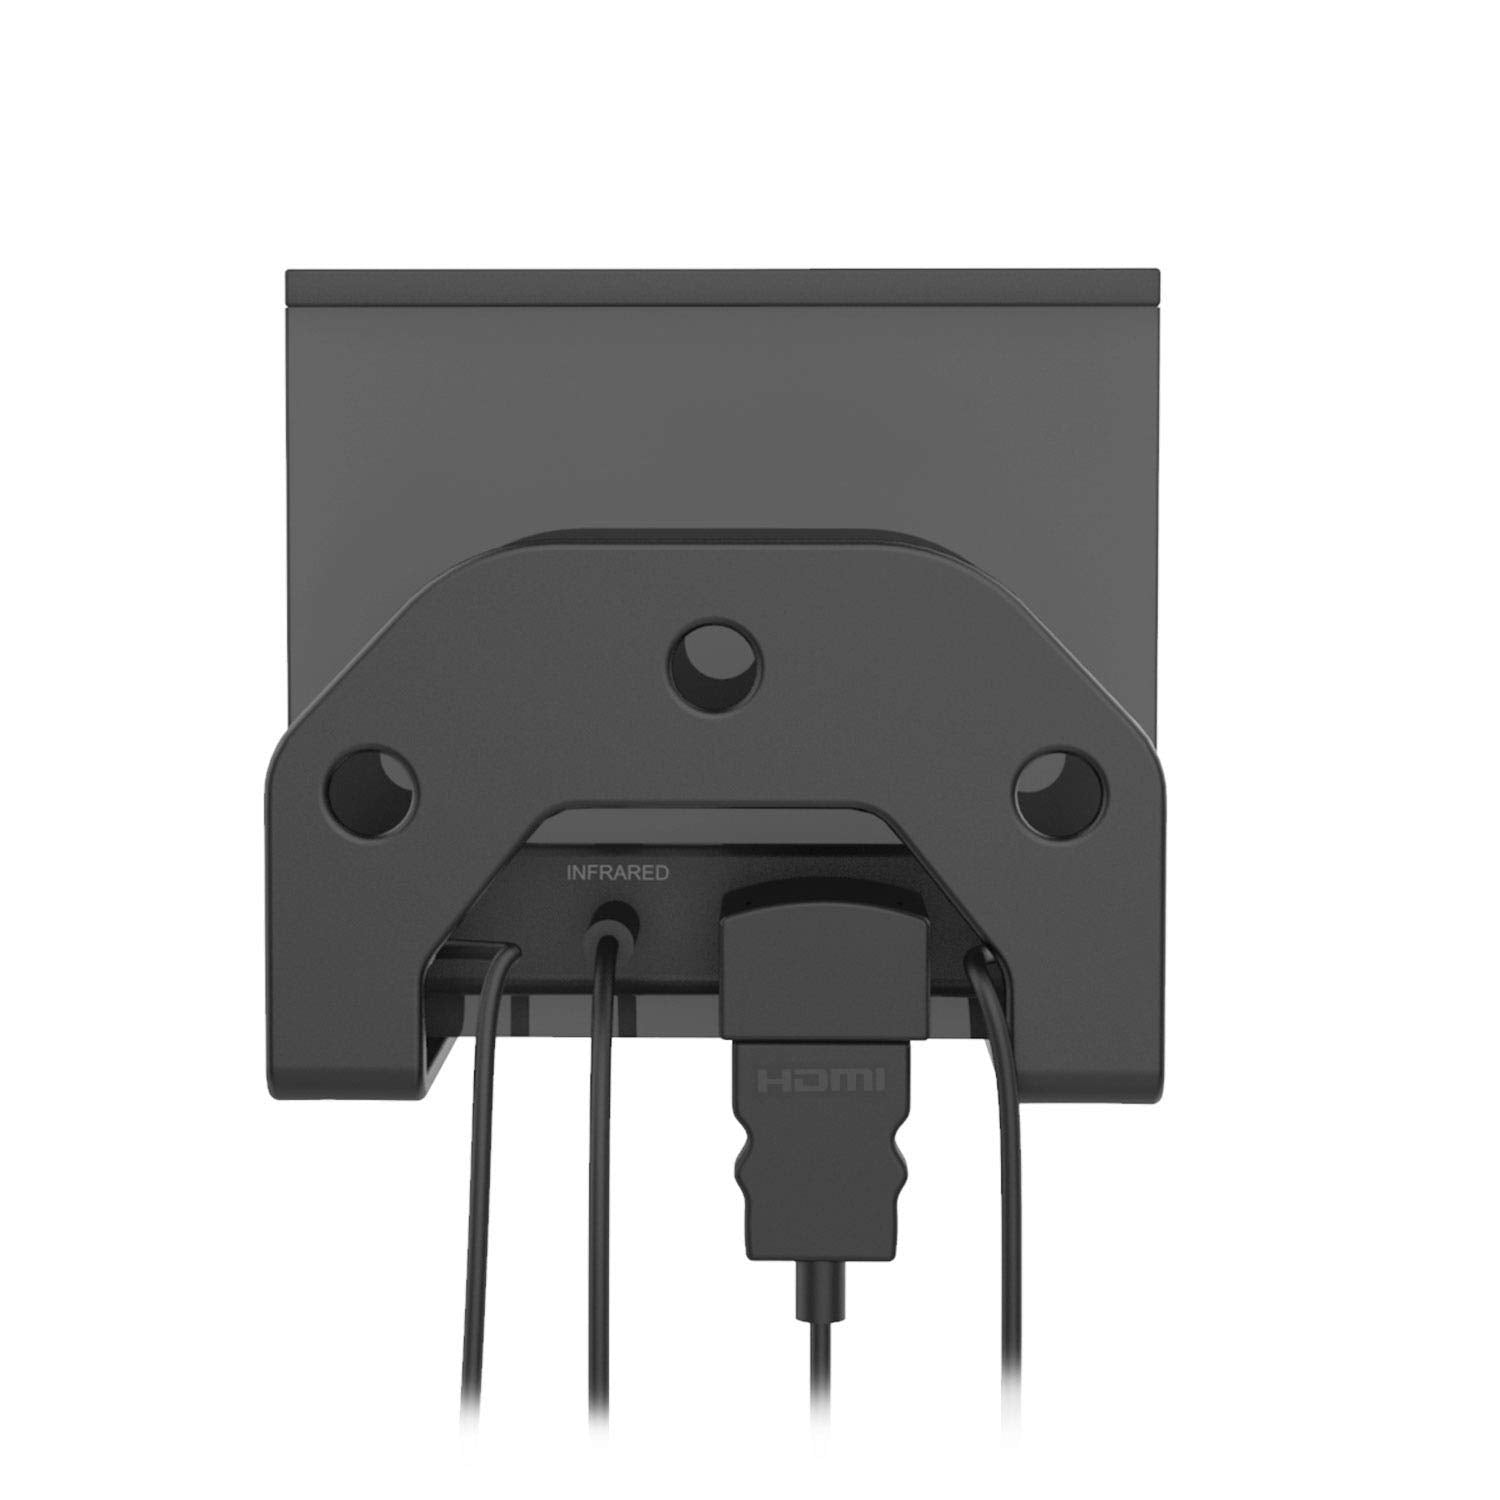 Dot Genie Easy Hanging Fire TV Cube Wall Mount (Fits 1st & 2nd Gen and New  3rd Gen Fire TV Cube) | Updated for More Support | Totally Hides Cords 